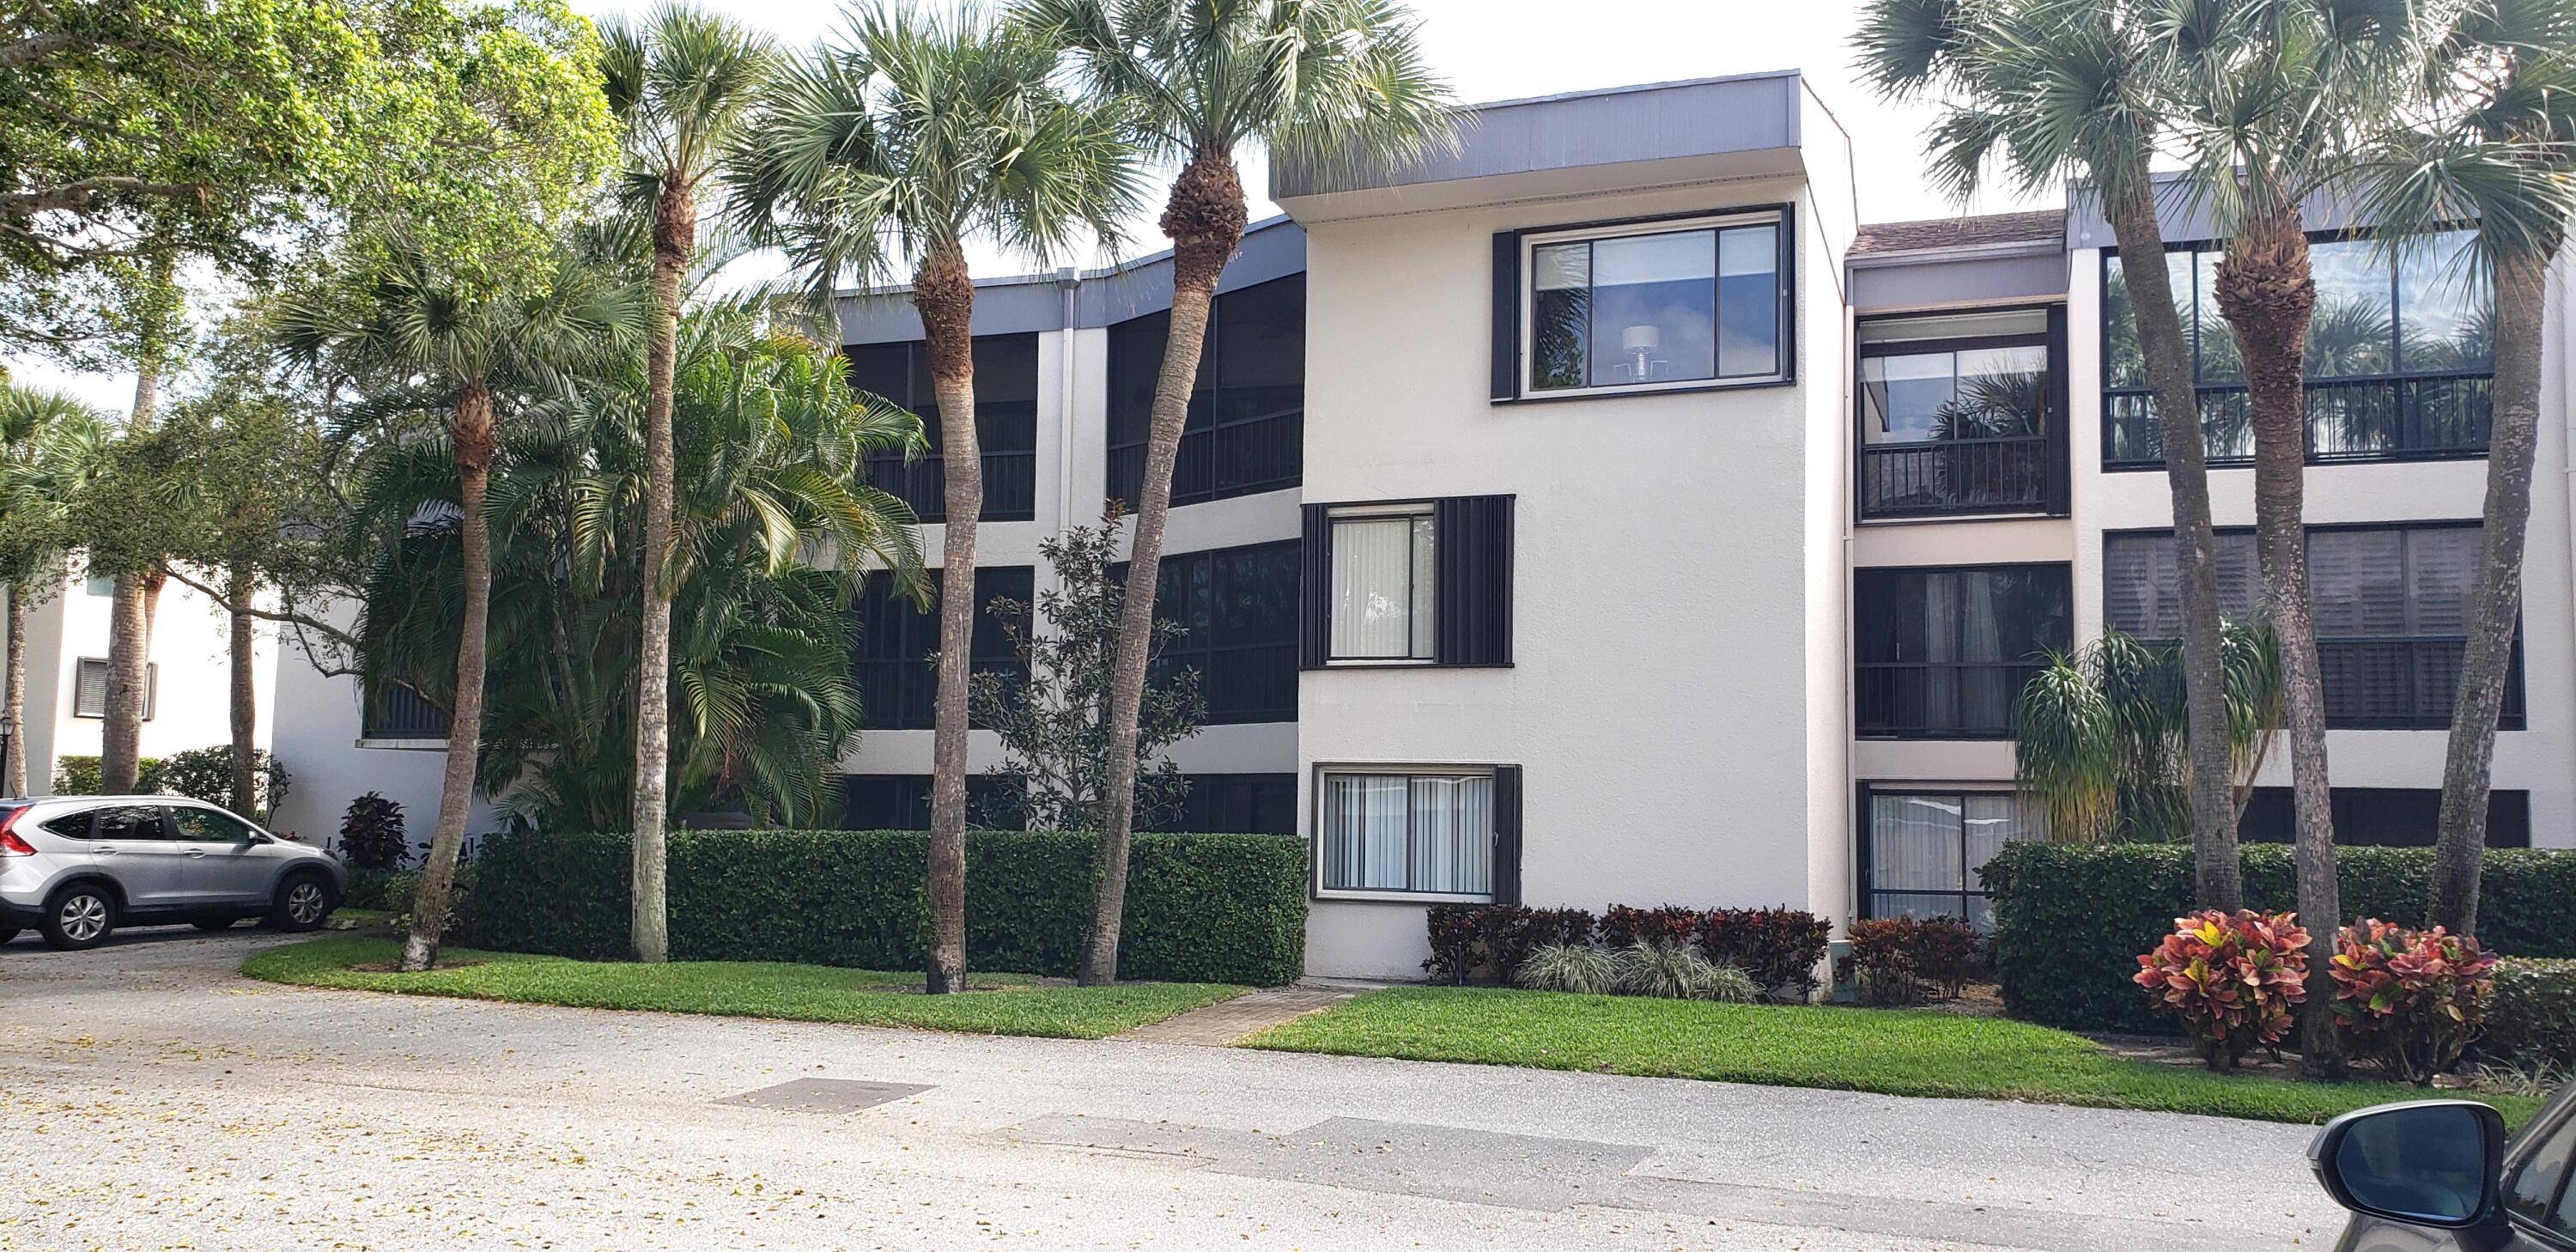 Large and spacious 2 2 condo with boat slips and intracoastal views on premises.